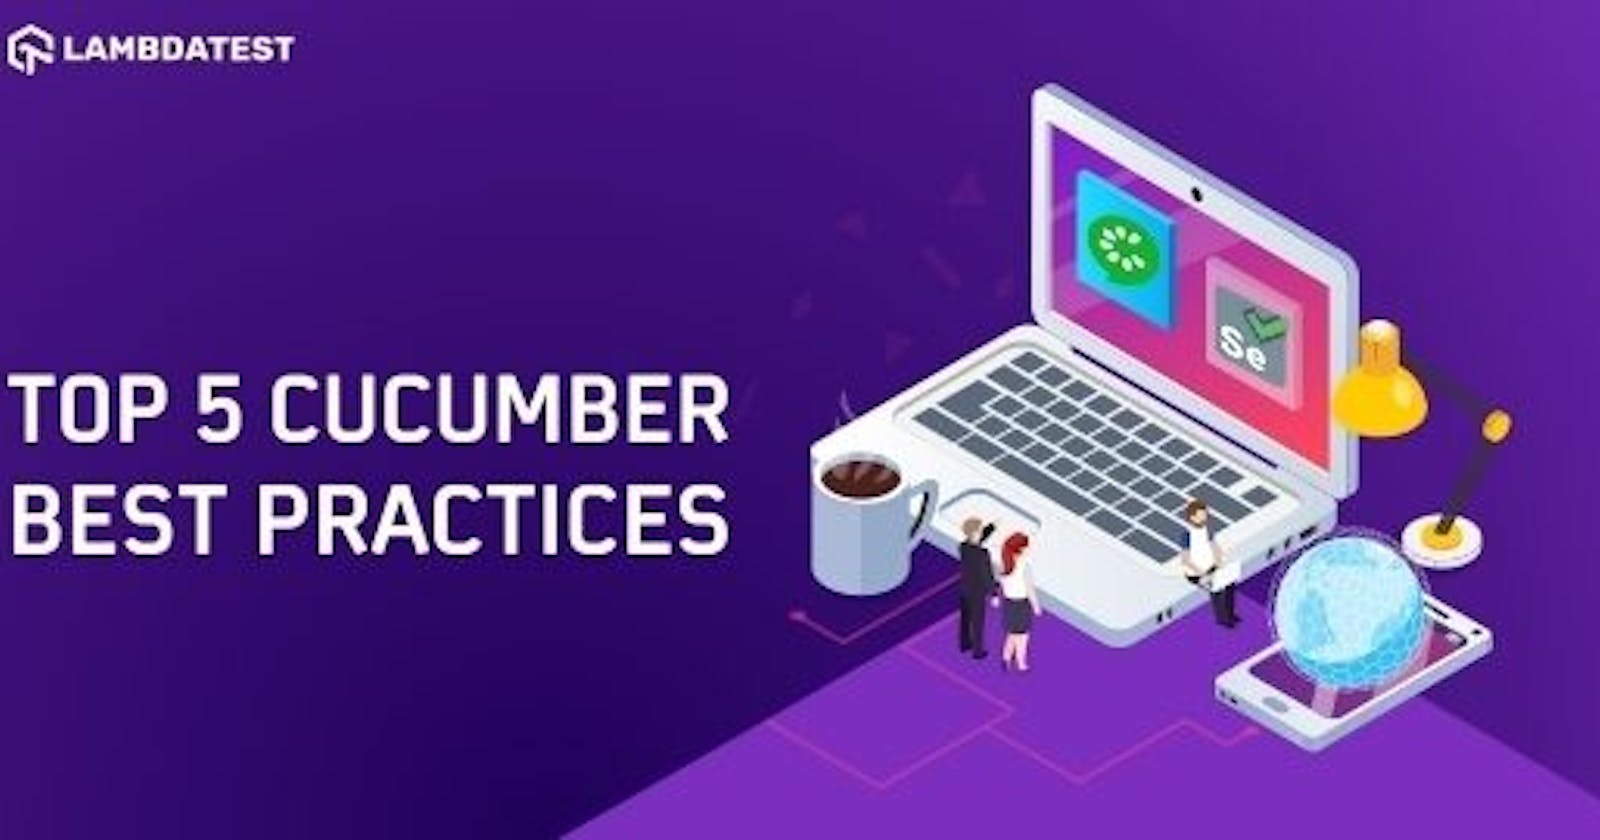 Top 5 Cucumber Best Practices For Selenium Automation